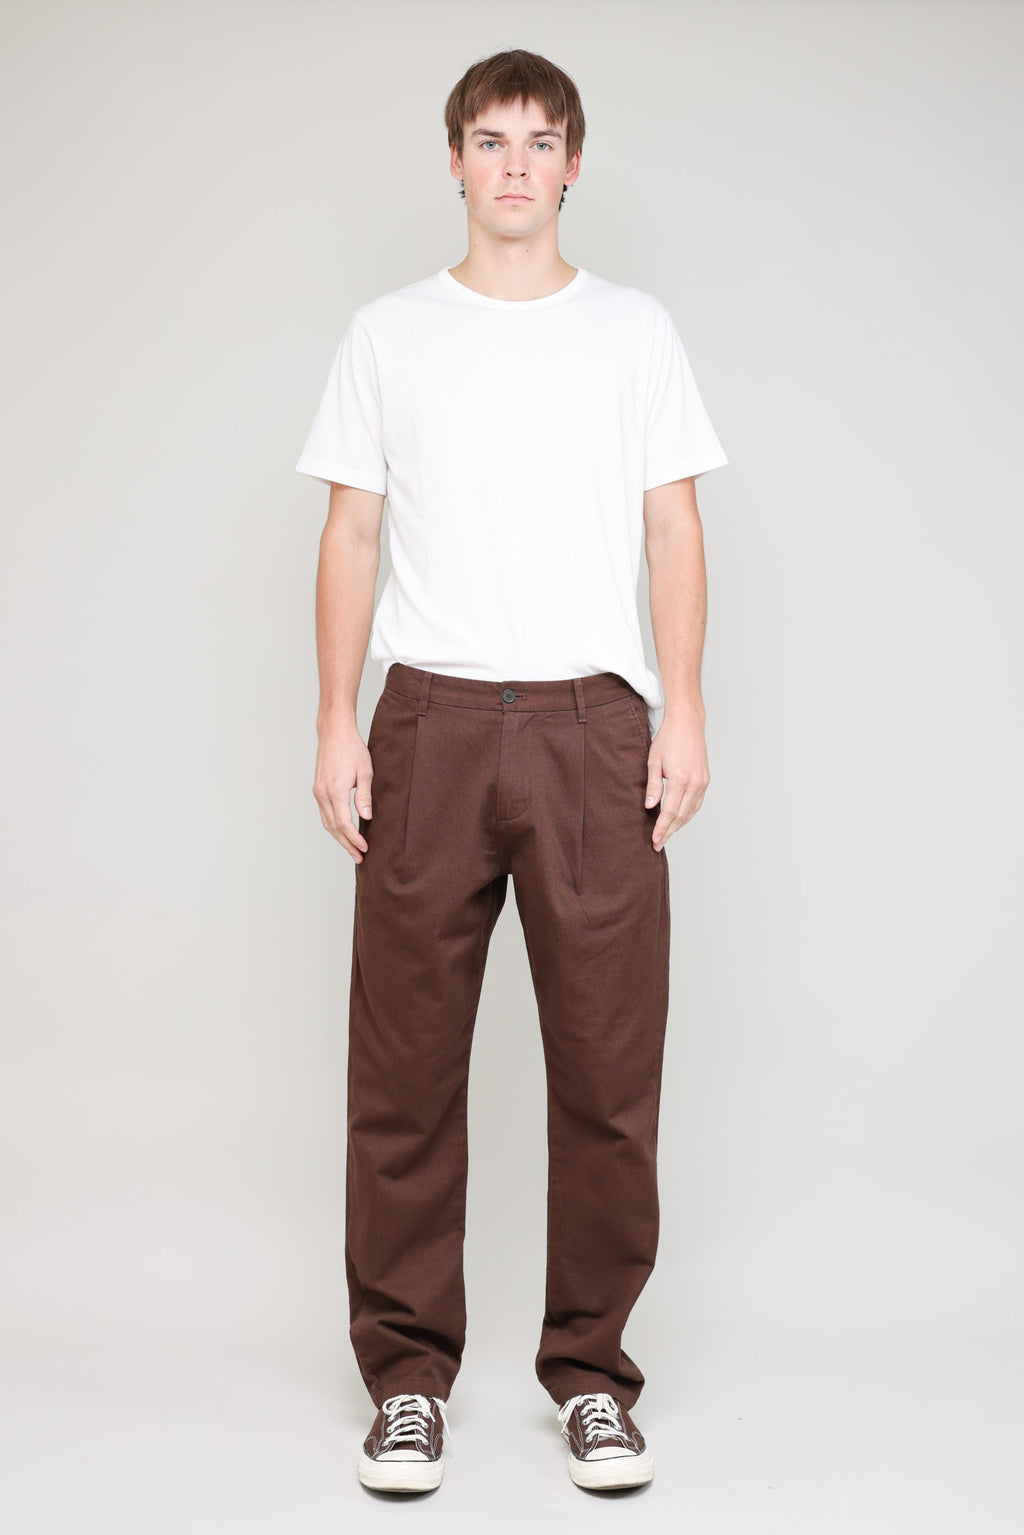 Pleated Chino Classic Tumbler Drill in Brown 02